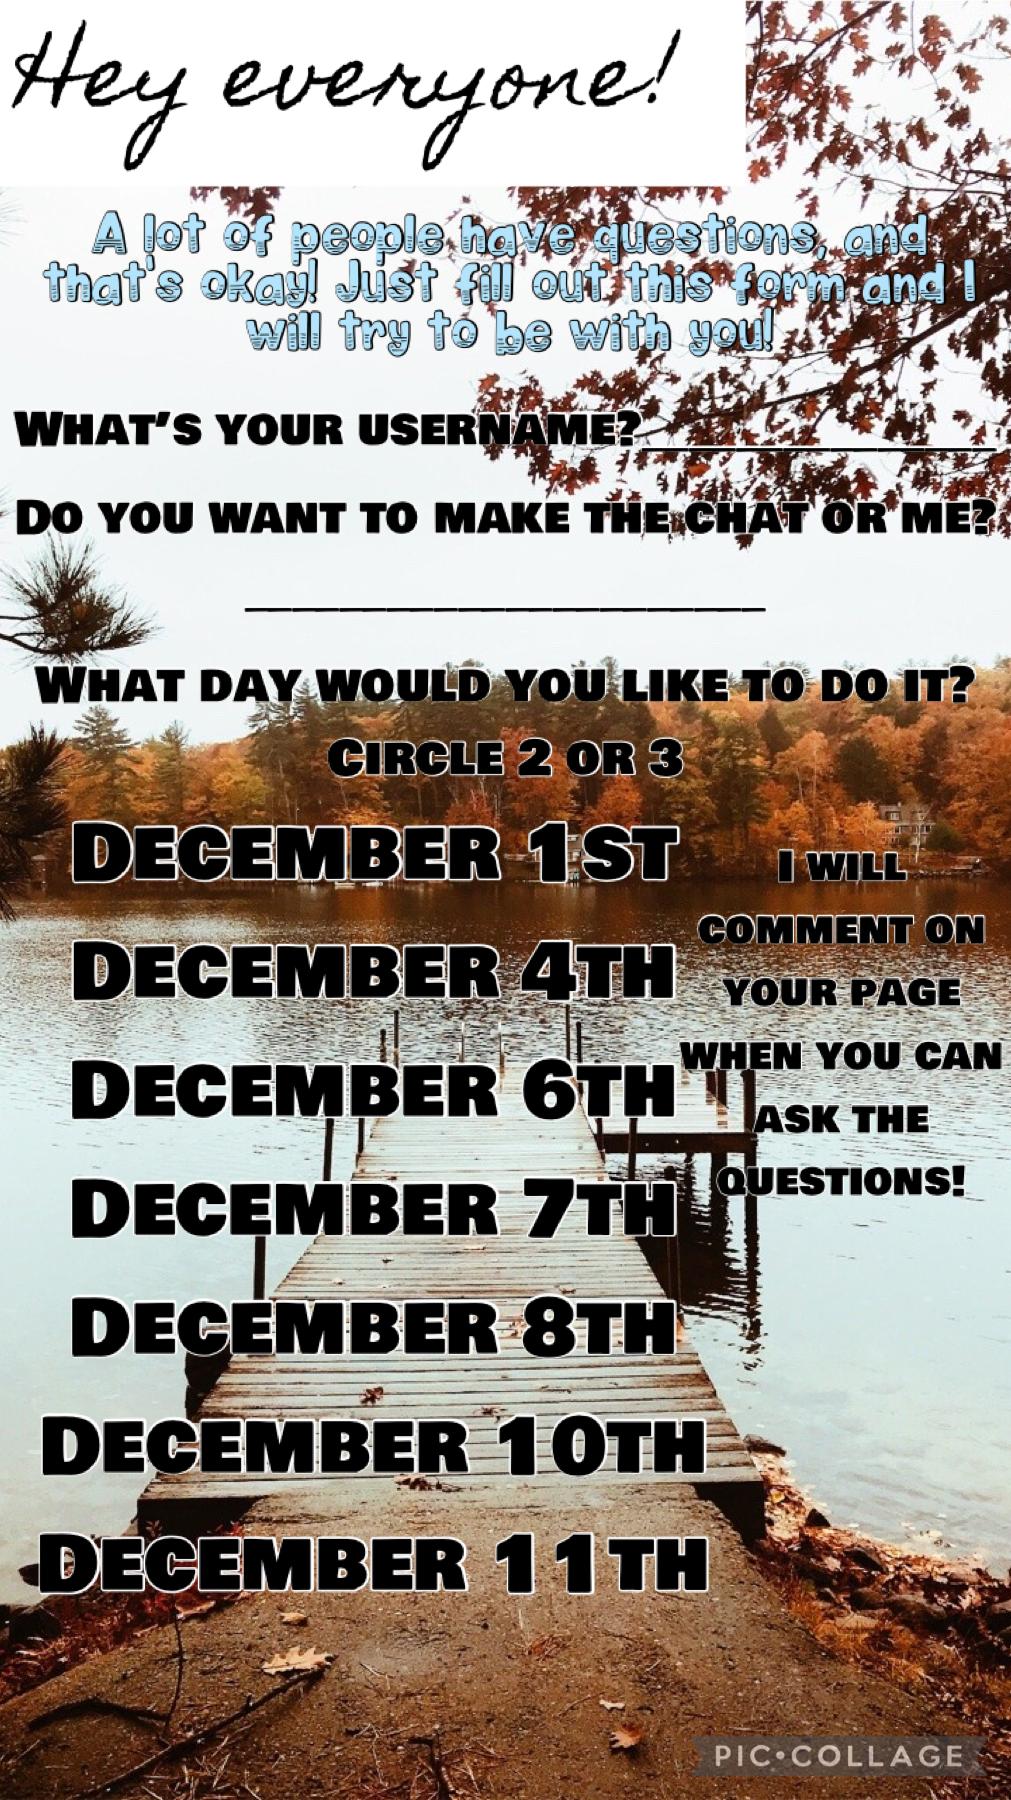 11/28/2021 tap✝️
I am sorry that the dates are all backed up to December 11th. I can do about 2 people 1 day! If you don’t have a question we can still just talk about God!